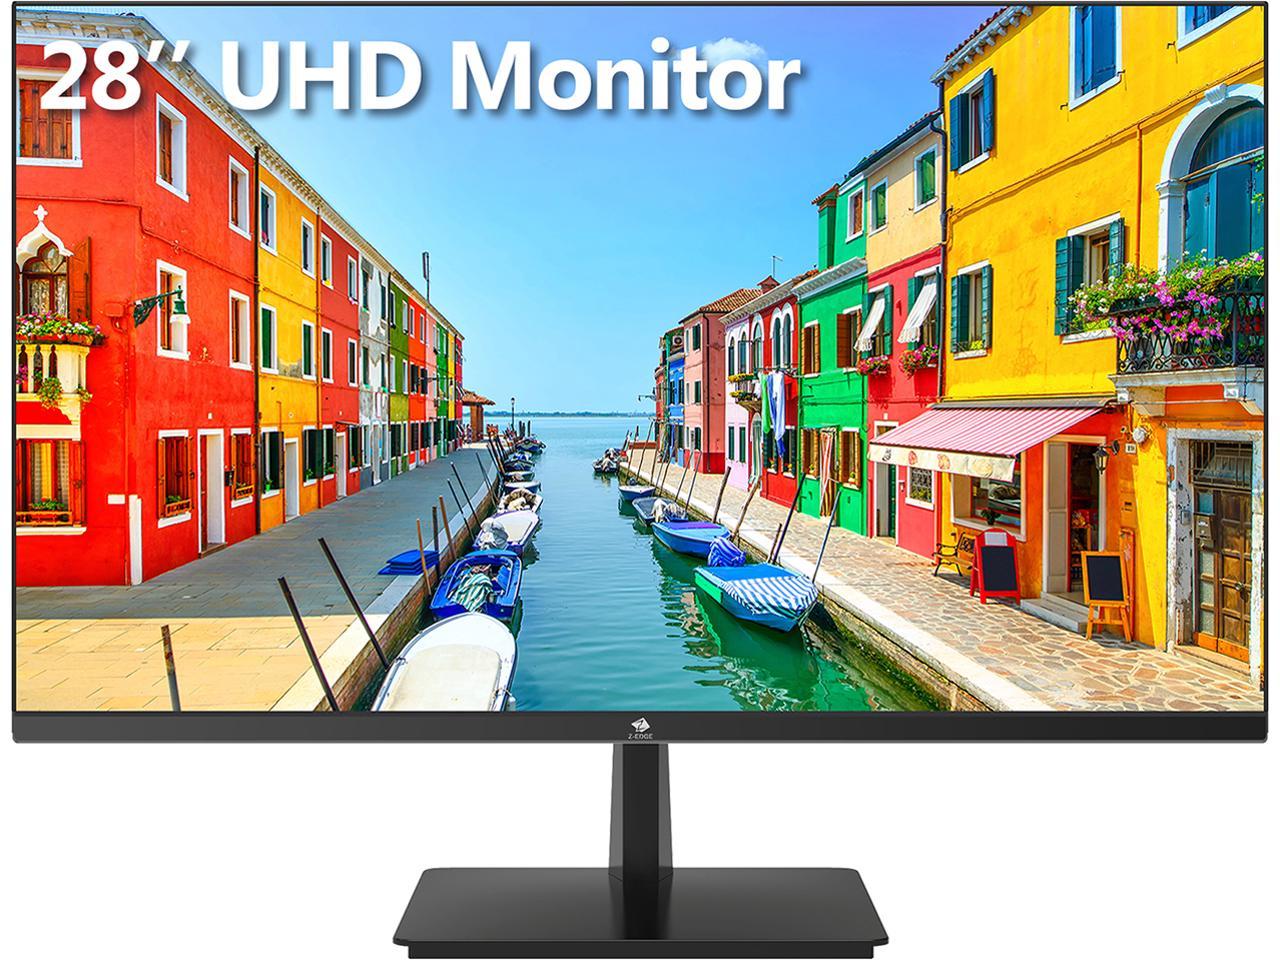 Make it heavy Put away clothes to justify Z-EDGE U28I4K 28" Ultra HD 4K IPS Monitor, UHD 3840 x 2160, 300 cd/m2, HDR,  4 ms Response Time, 60 Hz, HDMI+DP+Type-C+USB-B+2xUSB, FreeSync, Built-in  Speakers - Newegg.com